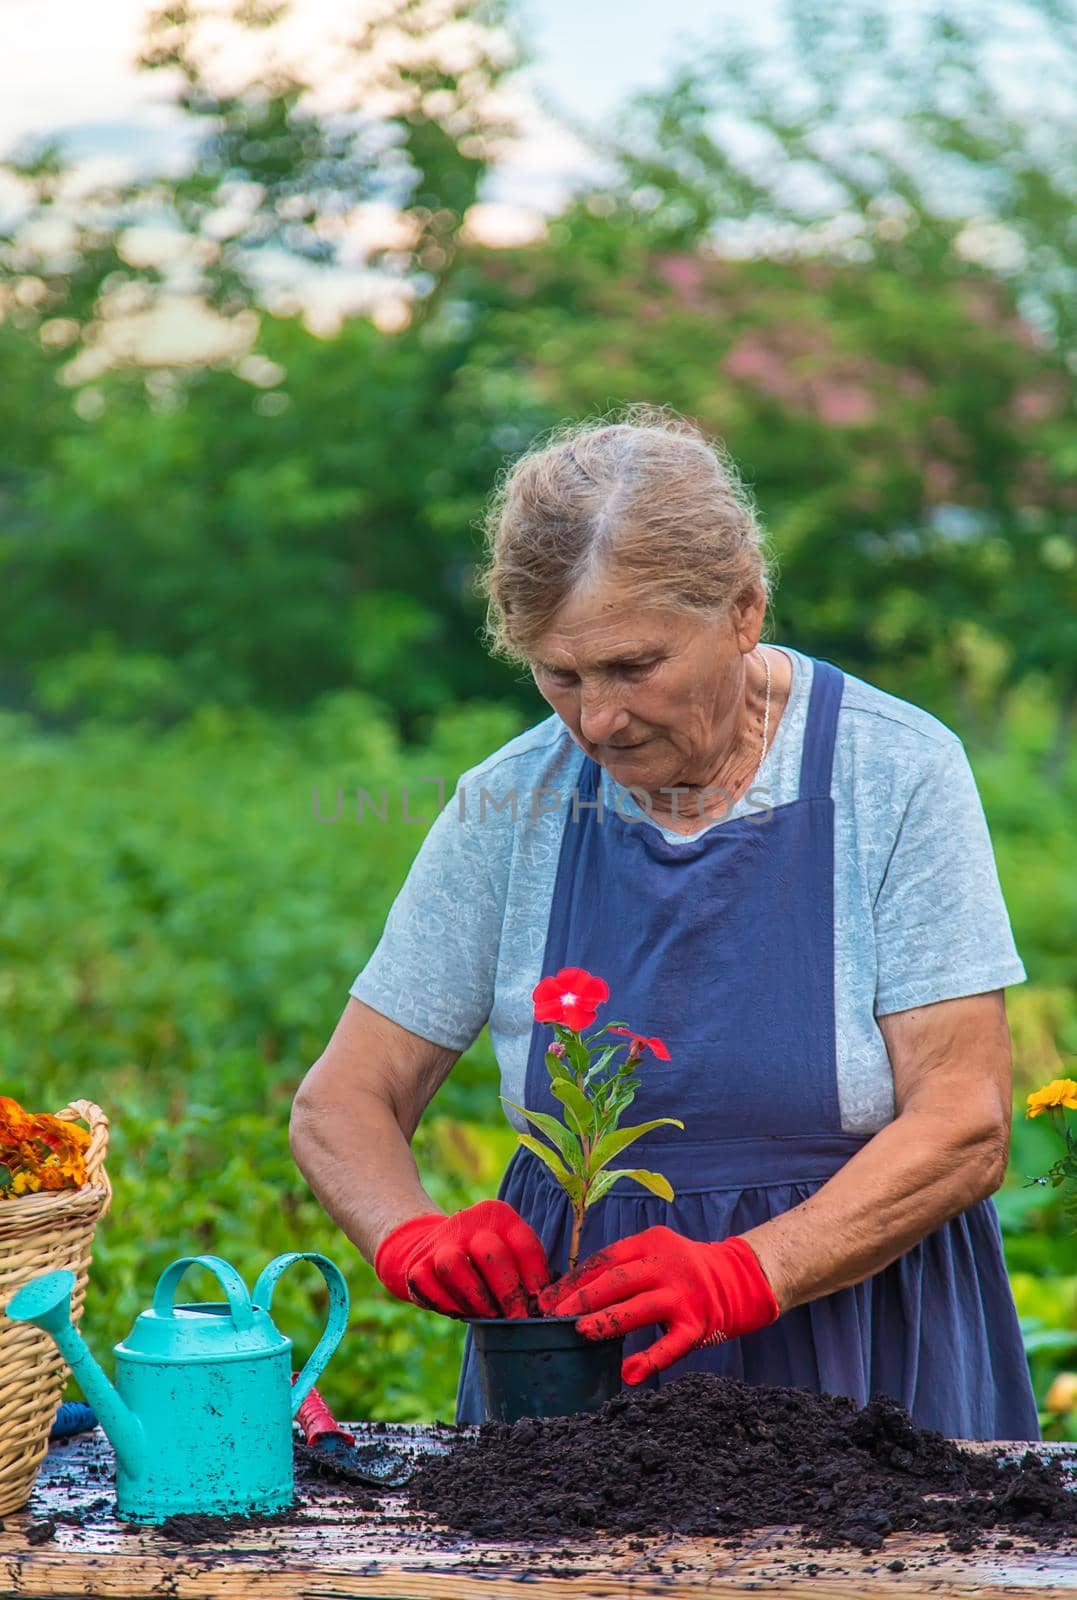 Senior woman is planting flowers in the garden. Selective focus. People.